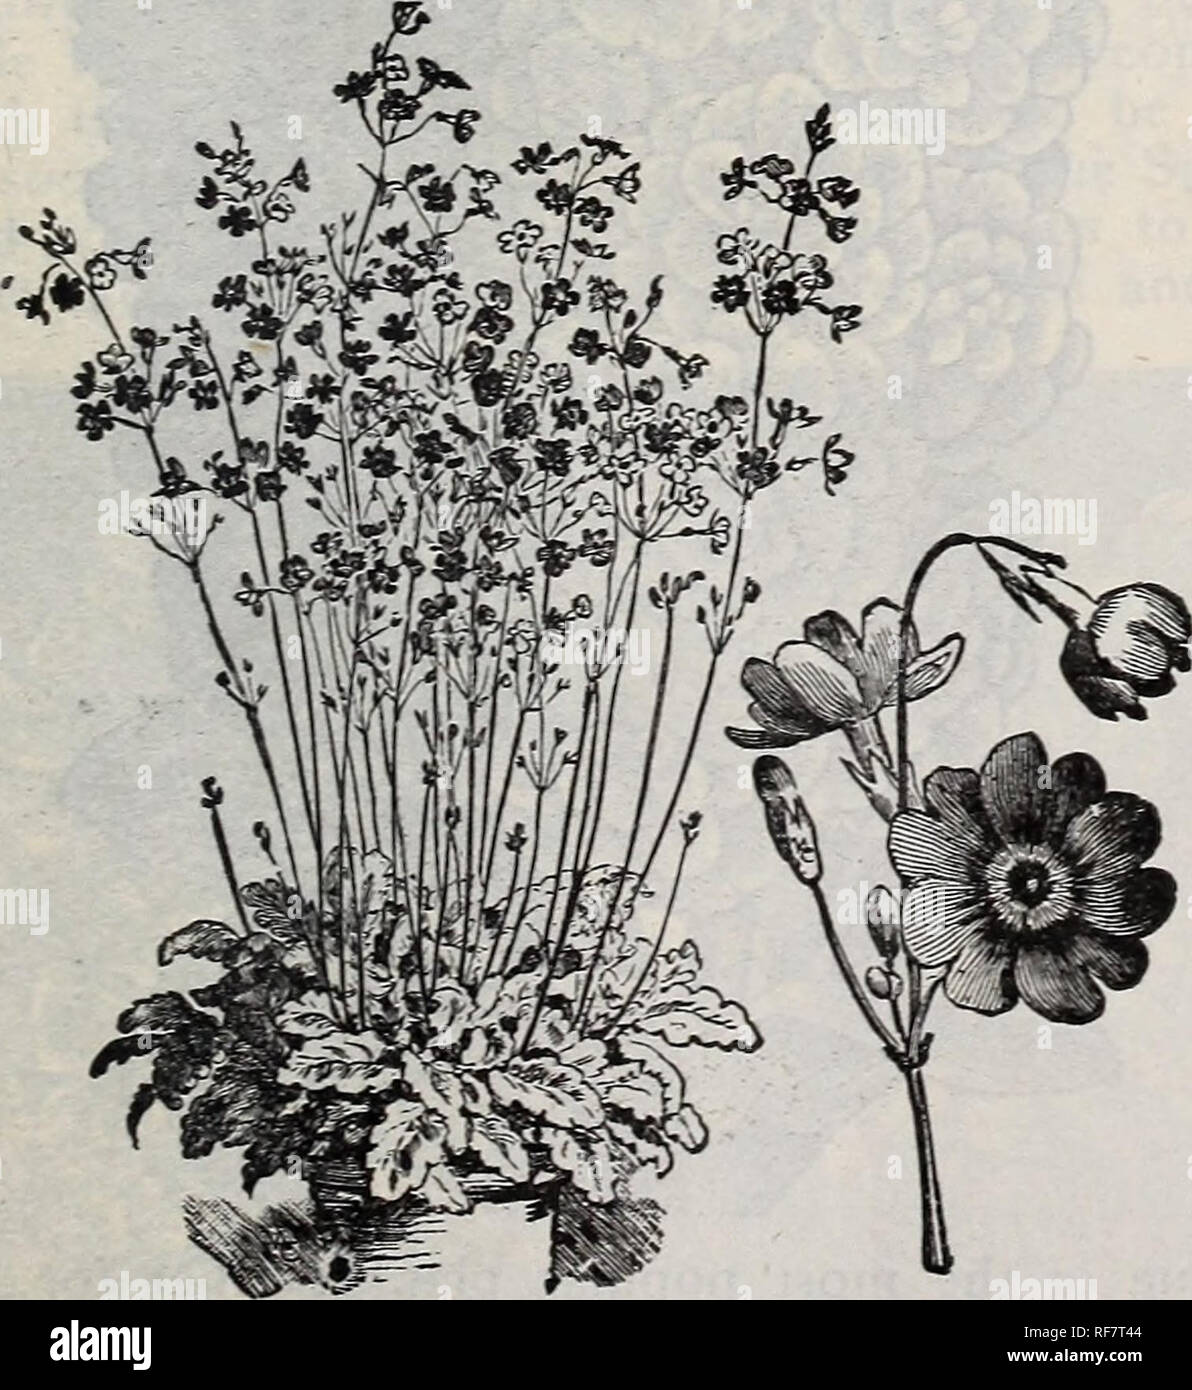 . Spring 1900. Nursery stock Ohio Painesville Catalogs; Vegetables Seeds Catalogs; Flowers Catalogs; Bulbs (Plants) Catalogs; Plants, Ornamental Catalogs; Fruit trees Seedlings Catalogs; Fruit Catalogs. The Chinese Primrose is one of the finest plants for Winter and Spring blooming in the house or conservatory; very profuse flowering, being in almost constant bloom all Winter. Greenhouse perennials. LARGE-FLOWERING FRINGED PRIMROSES. Rubra Red.' Distinct and striking, single 25 Alba. Pure white, single . 25 Choicest Mixed Colors. Single 25 Double Large-flowering Fringed. Mixed 50 PRIMULA FORBE Stock Photo